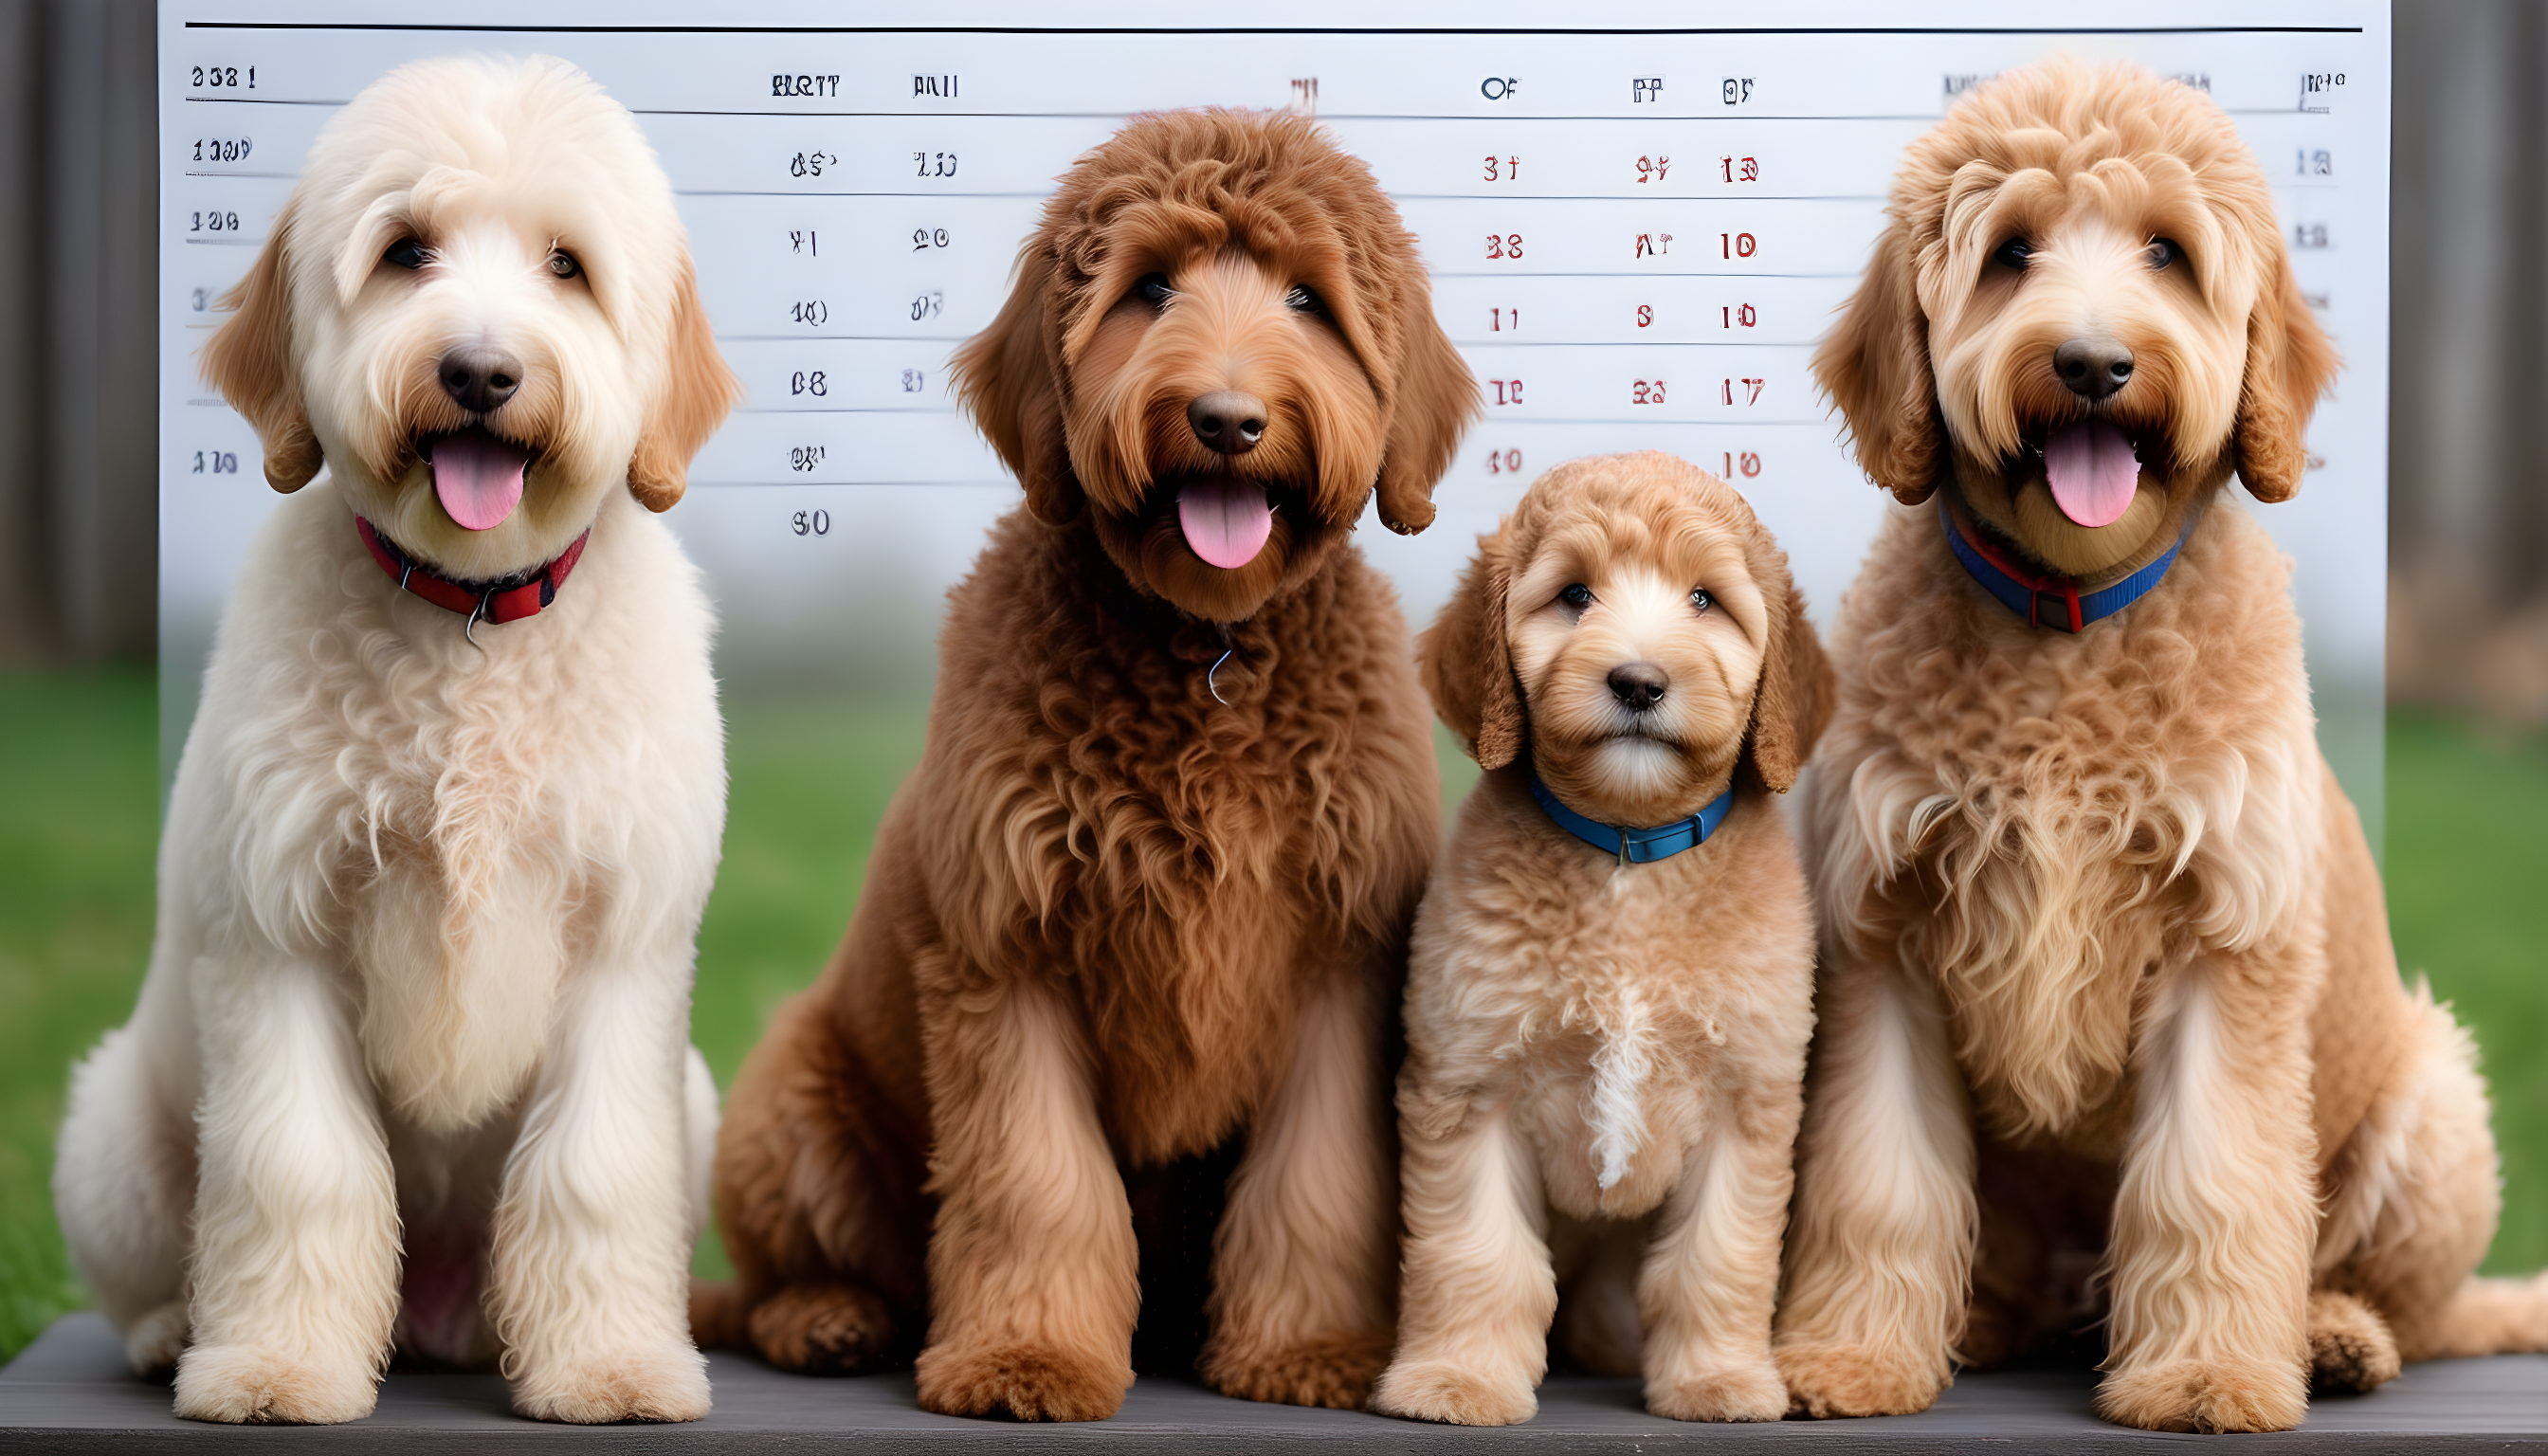 Size chart of standard, medium, and mini Labradoodles